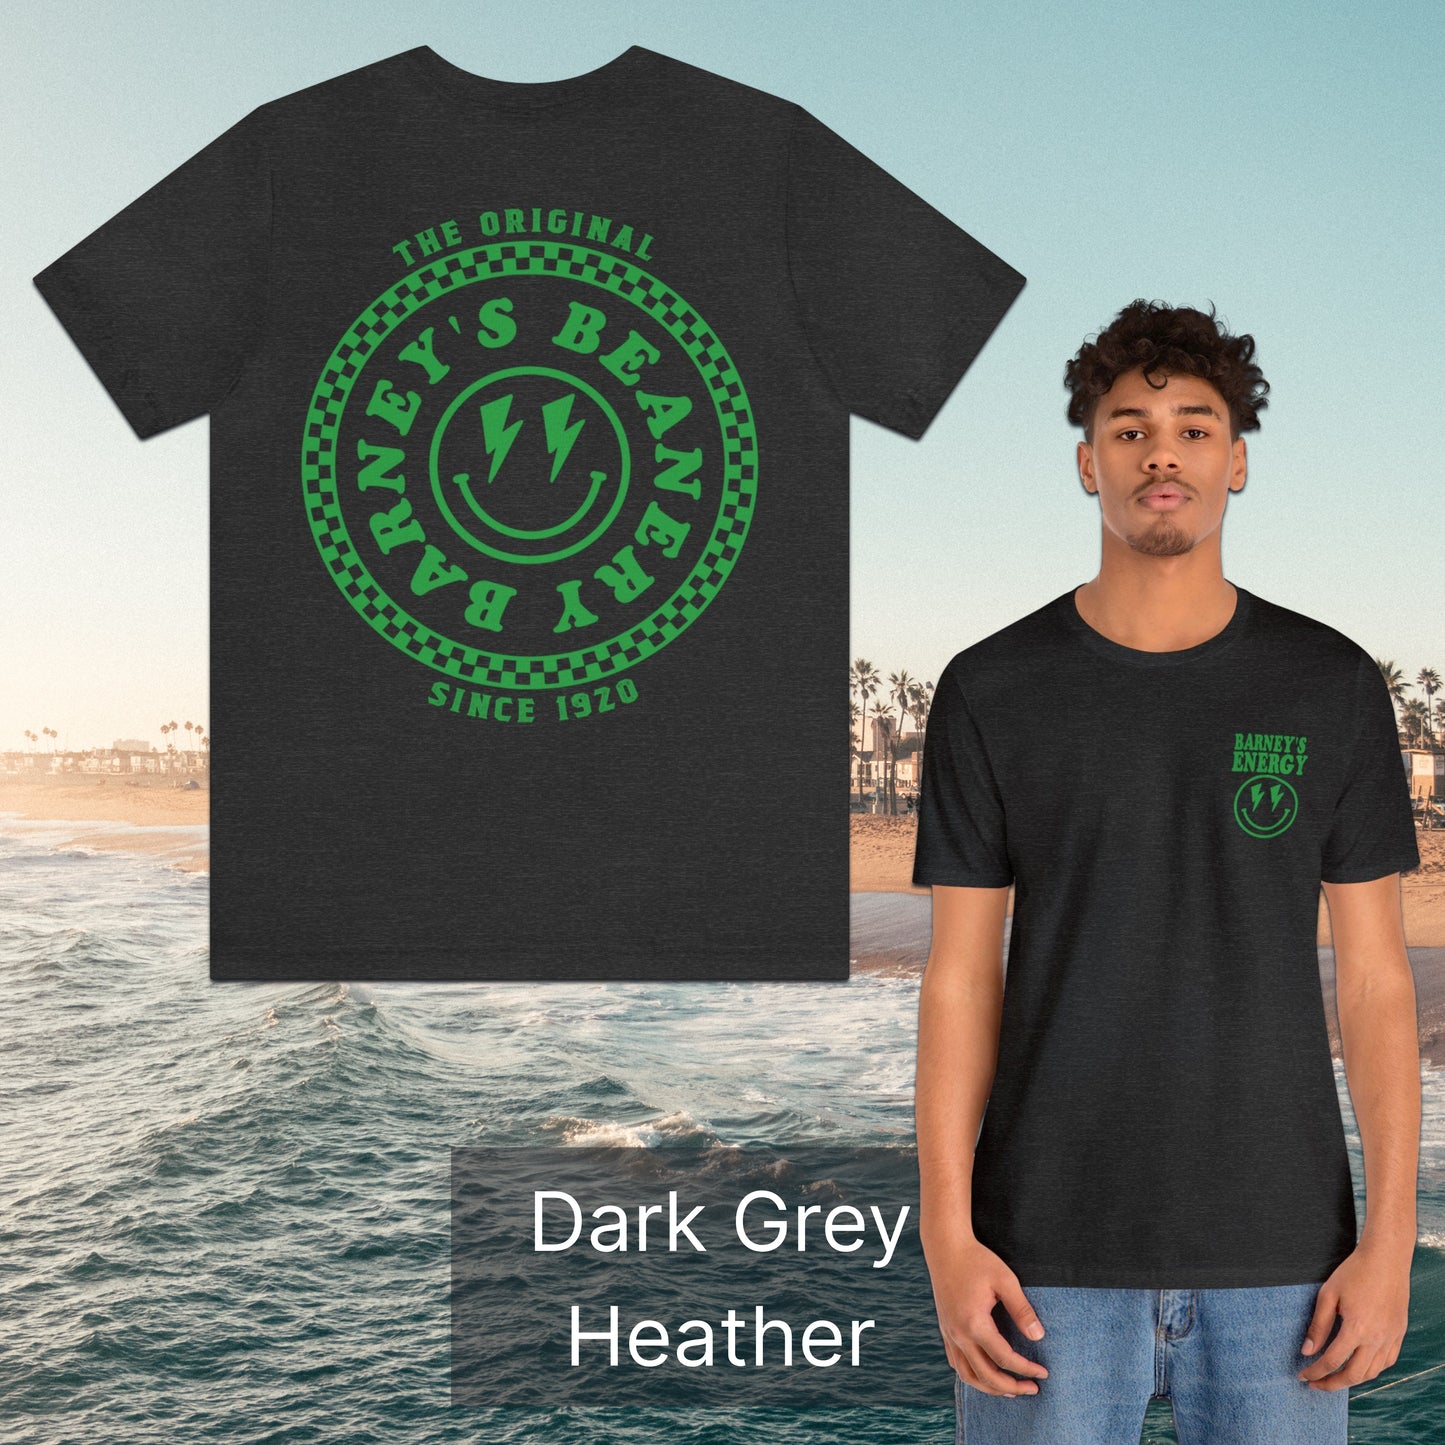 Barney's Energy | BARNEY'S BEANERY - Men's Smiley Face Tee | Green Graphics On Dark Grey Heather T-Shirt, Flat Lay View Front And Back